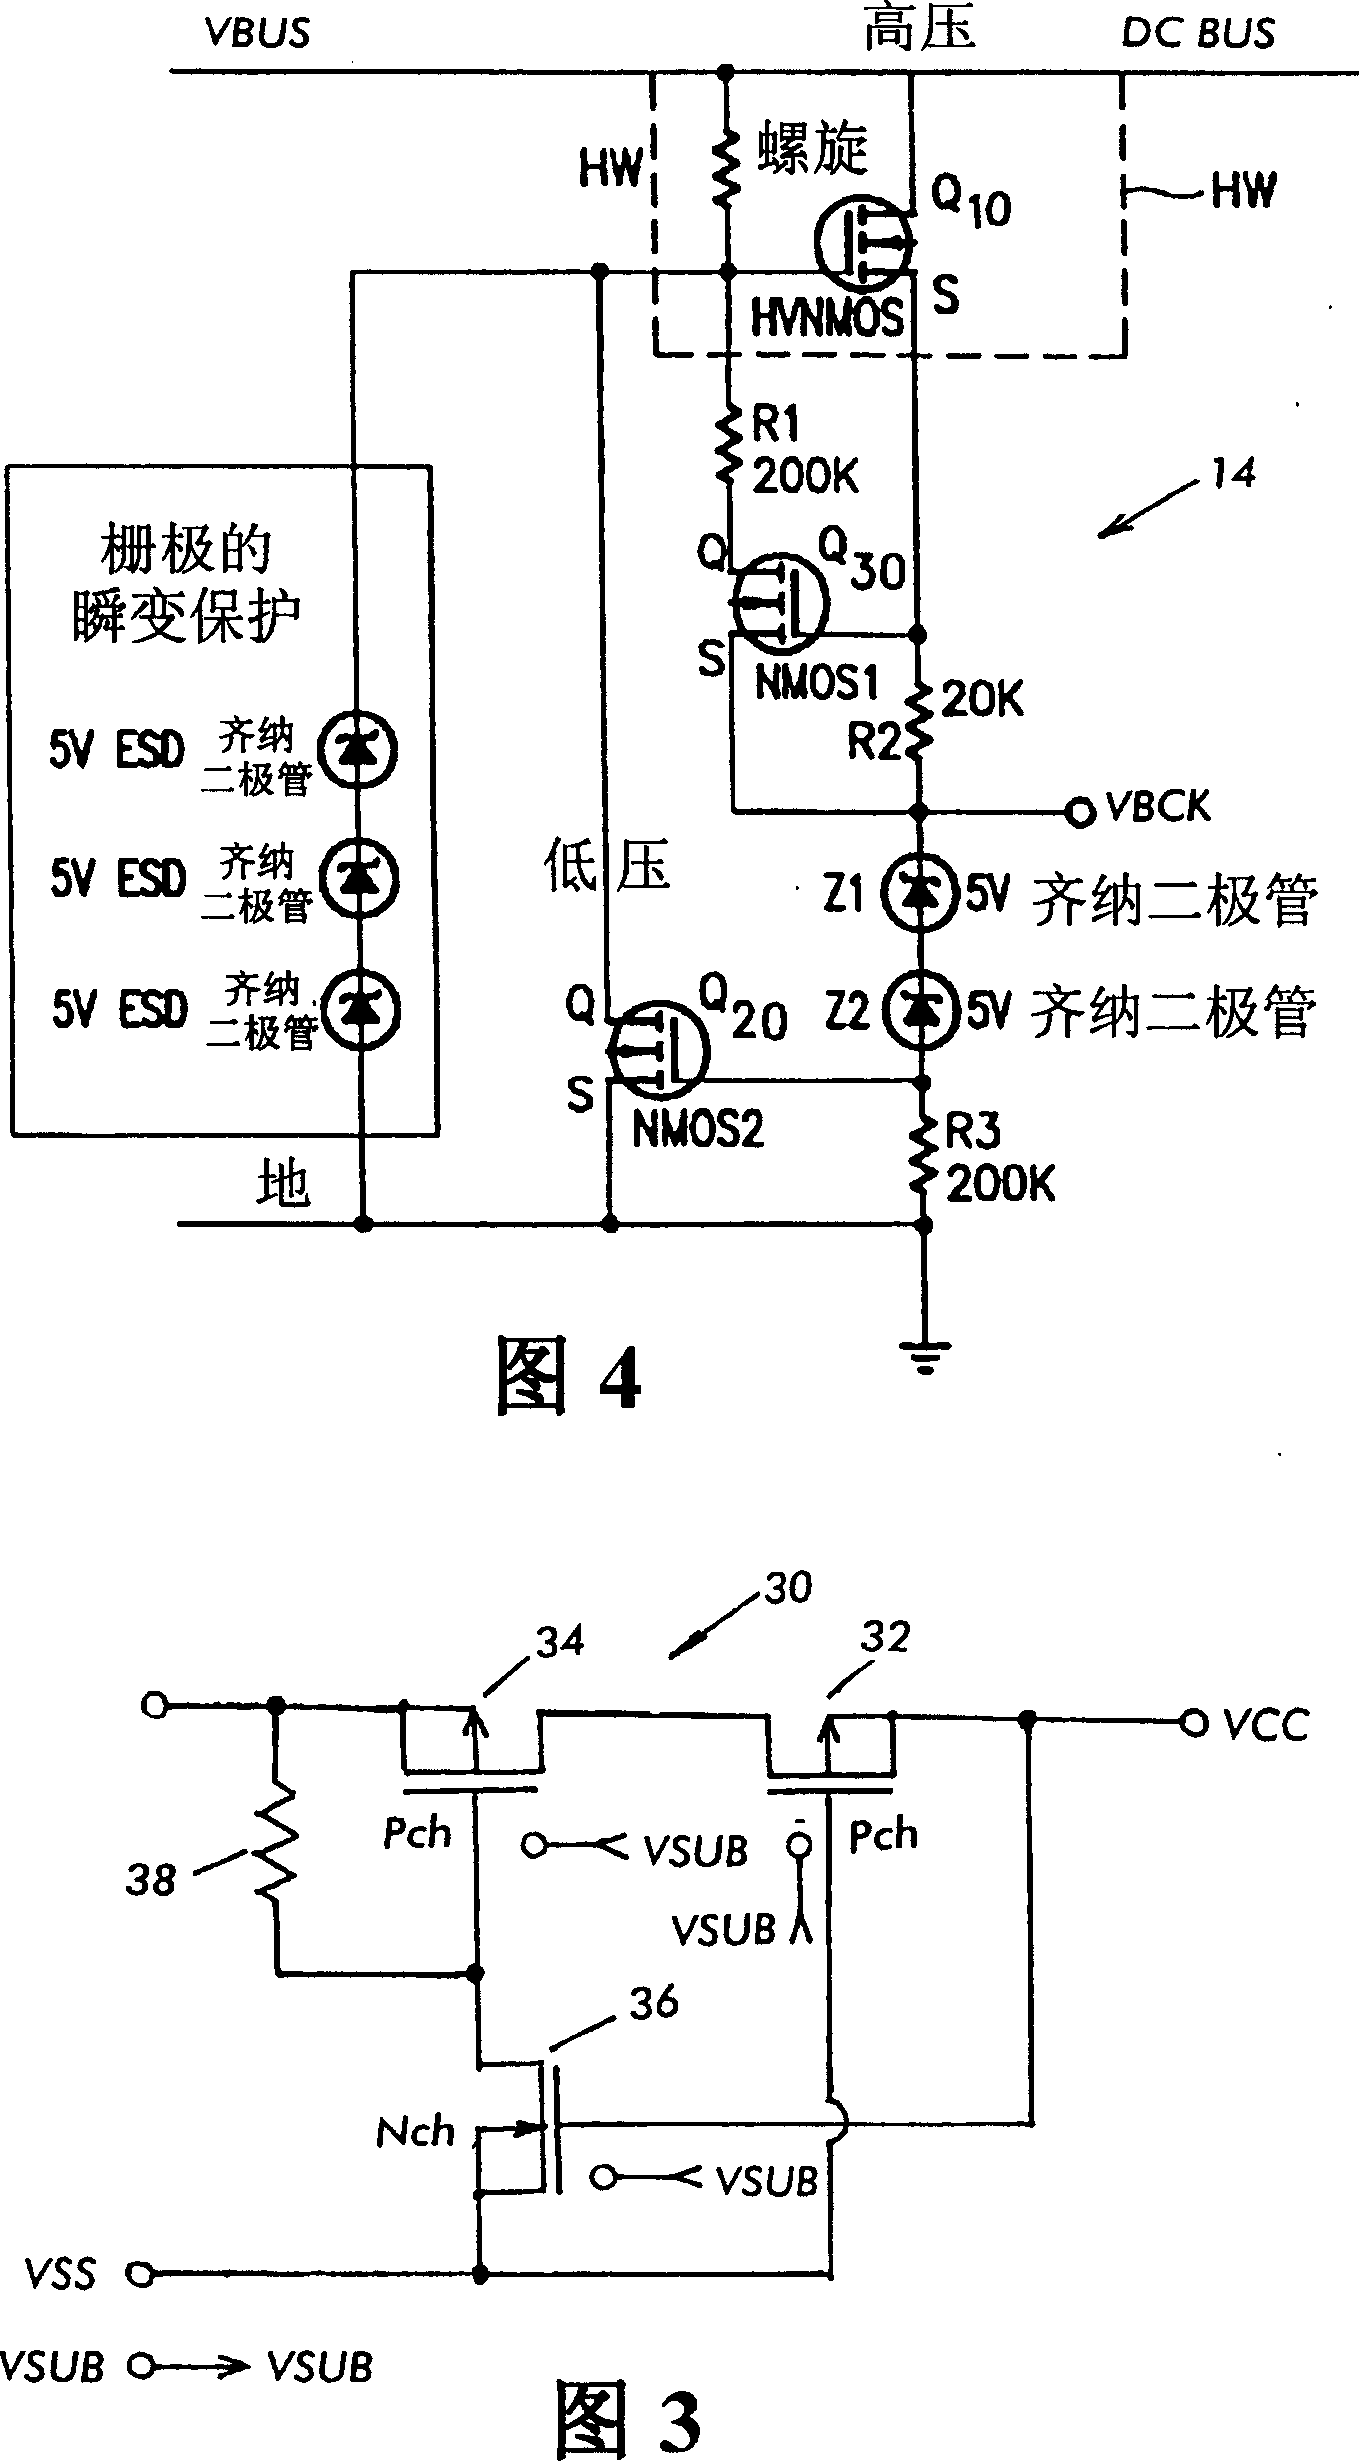 Safety circuit for permanent magnet synchronous generator actuated by weak field